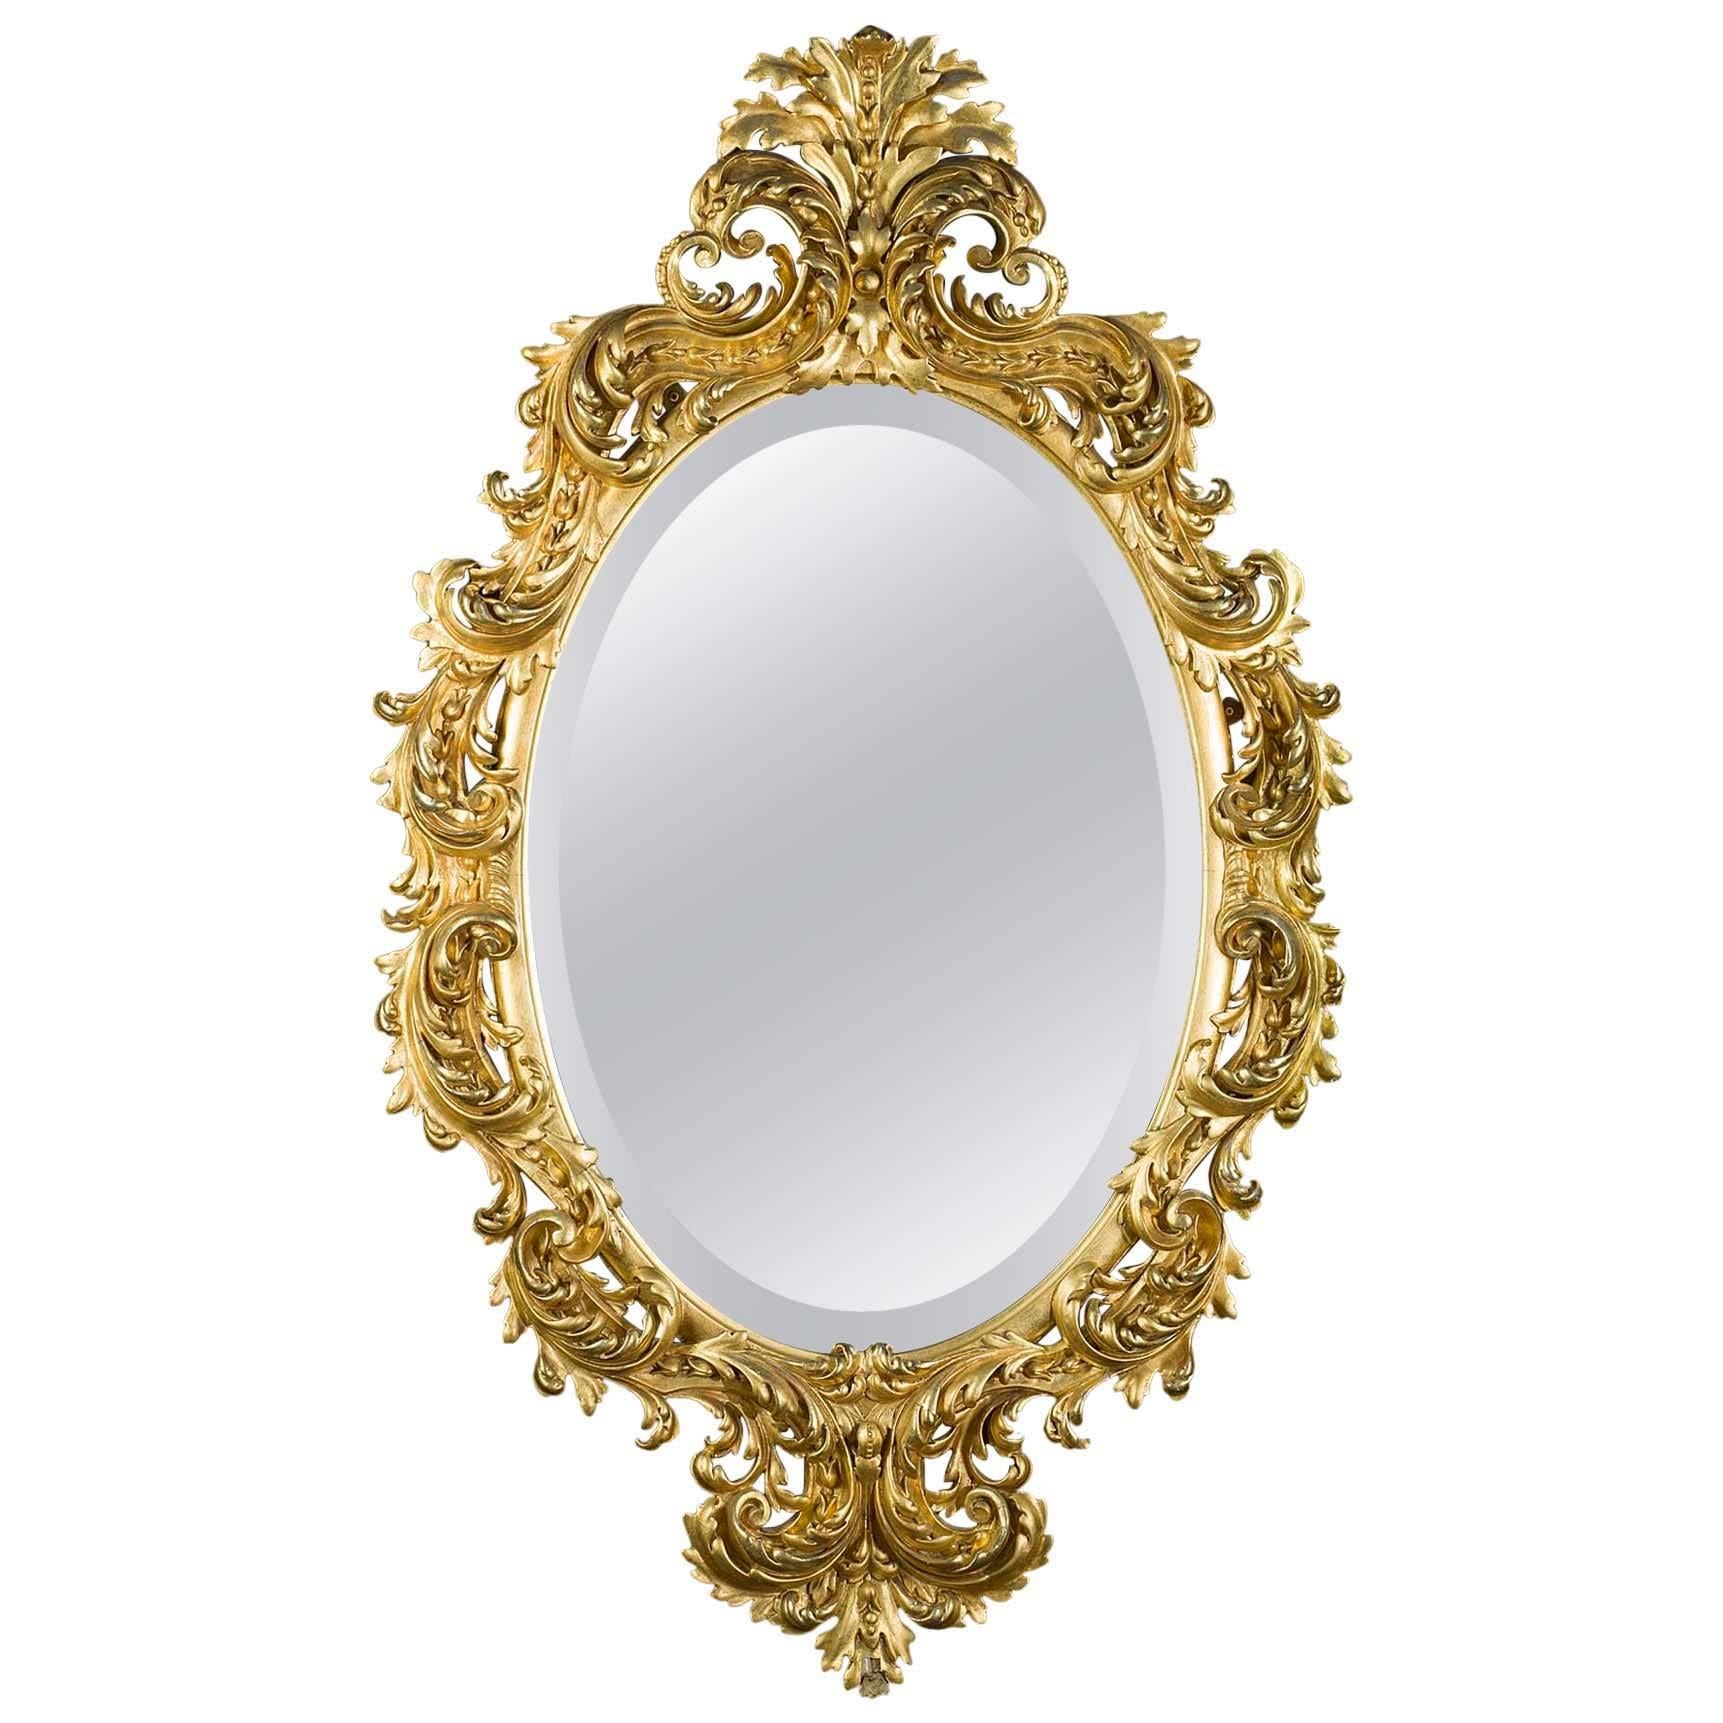 Ornate French Rococo Style Giltwood Mirror, 19th Century